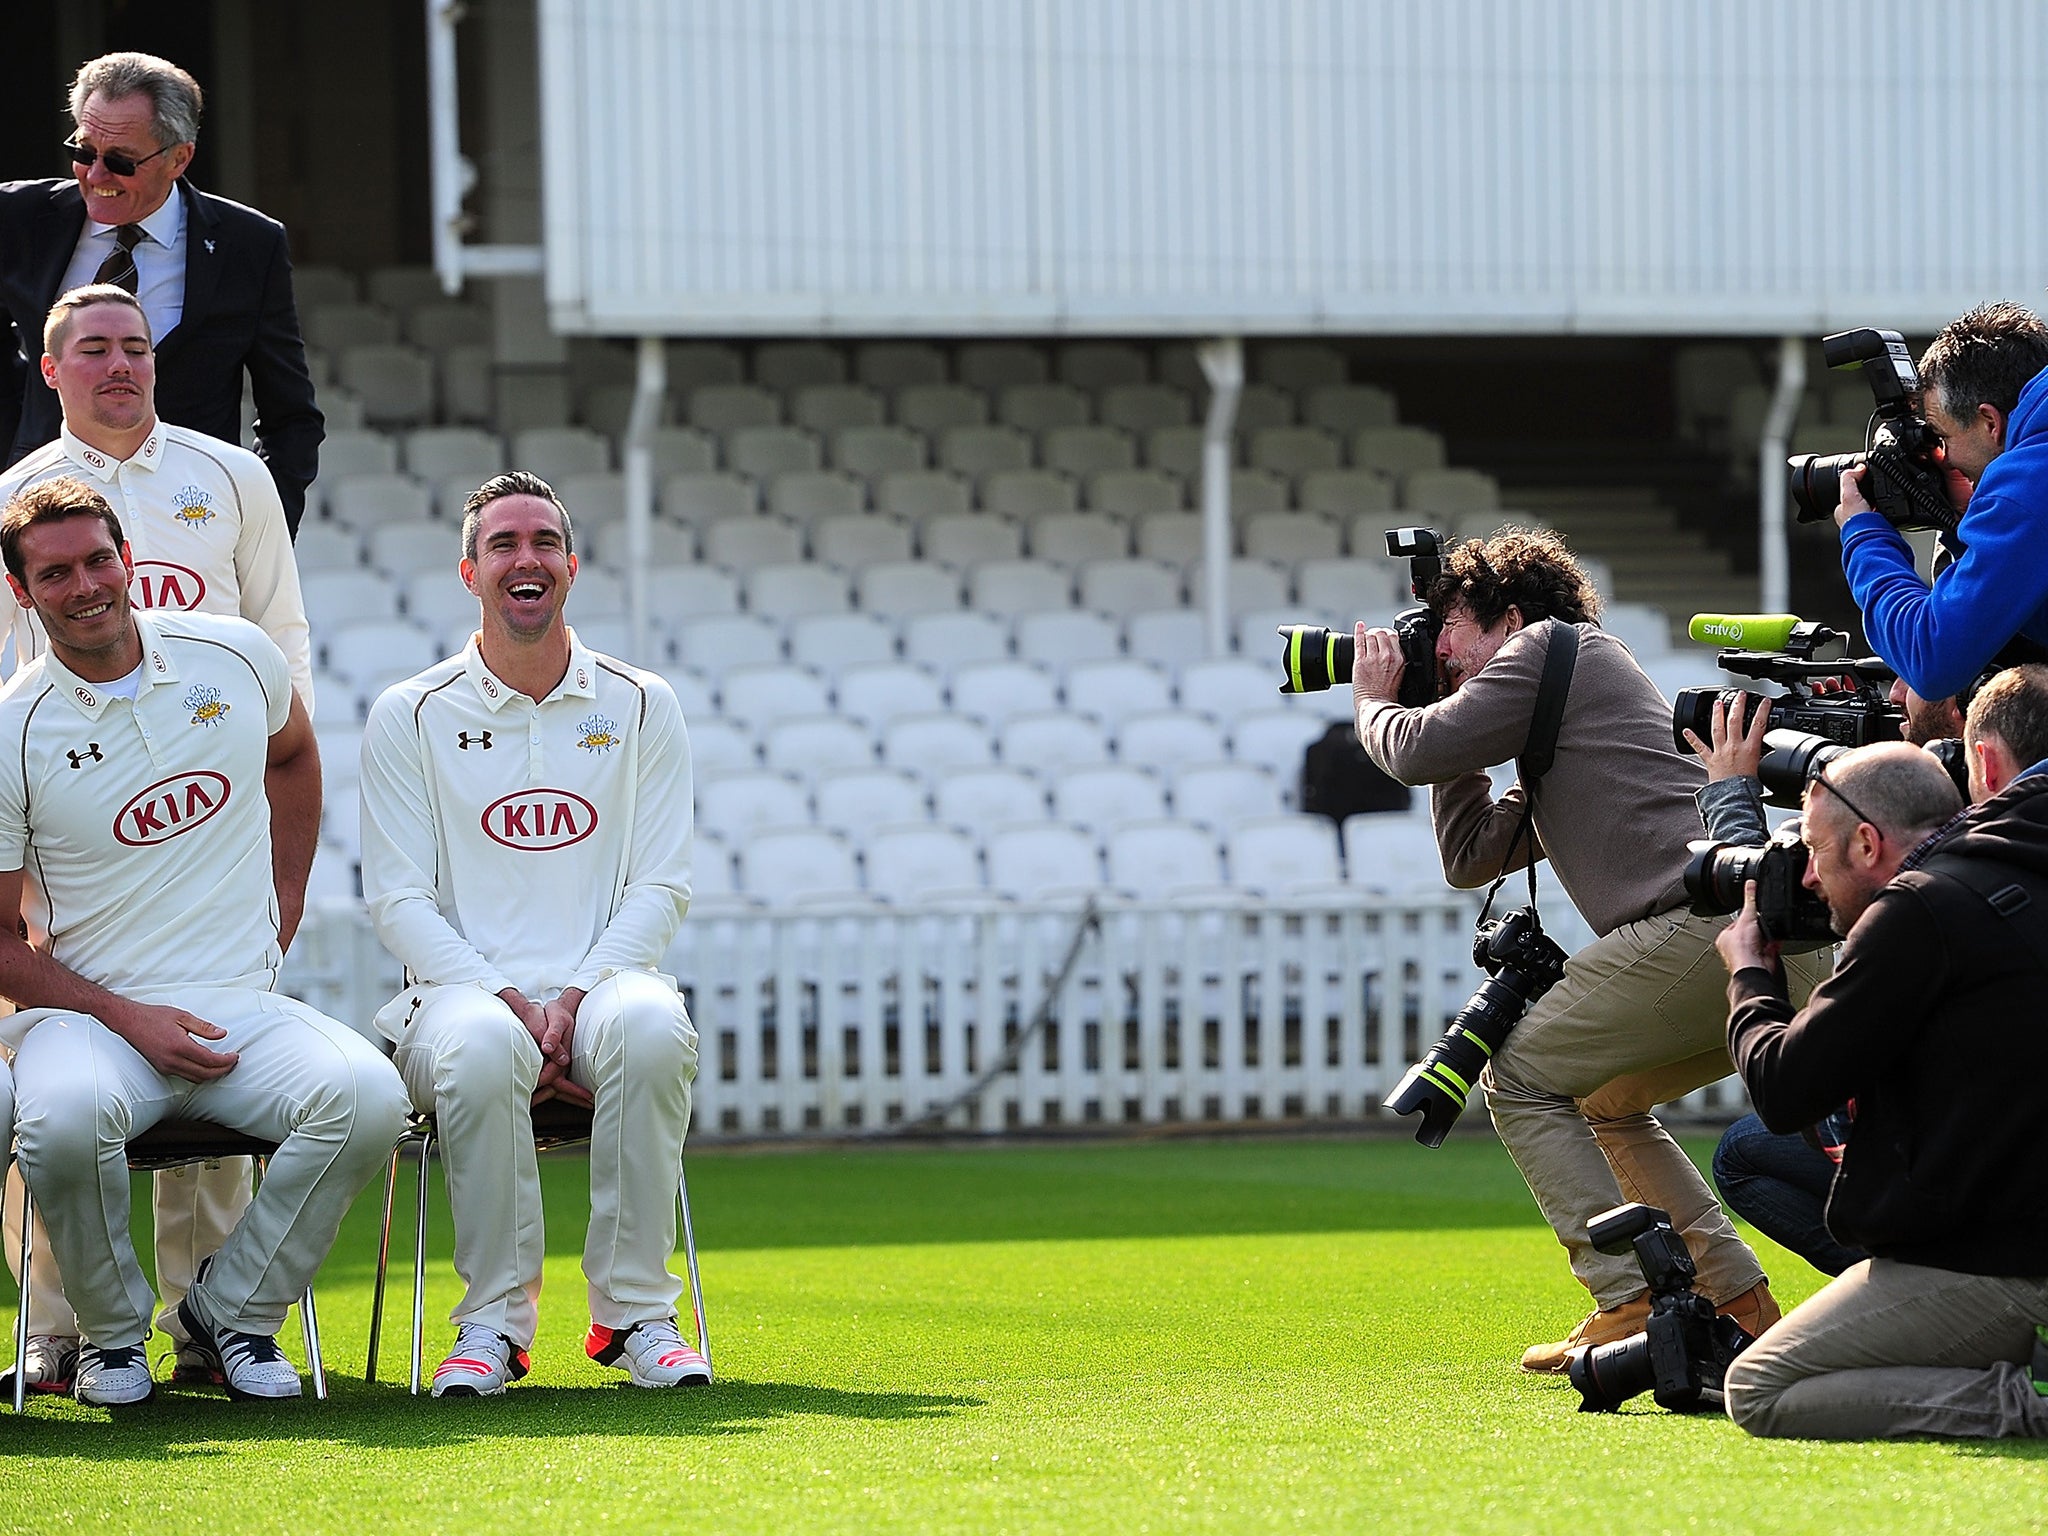 Kevin Pietersen is the centre of attention despite sitting on the end of Surrey’s
team photo yesterday